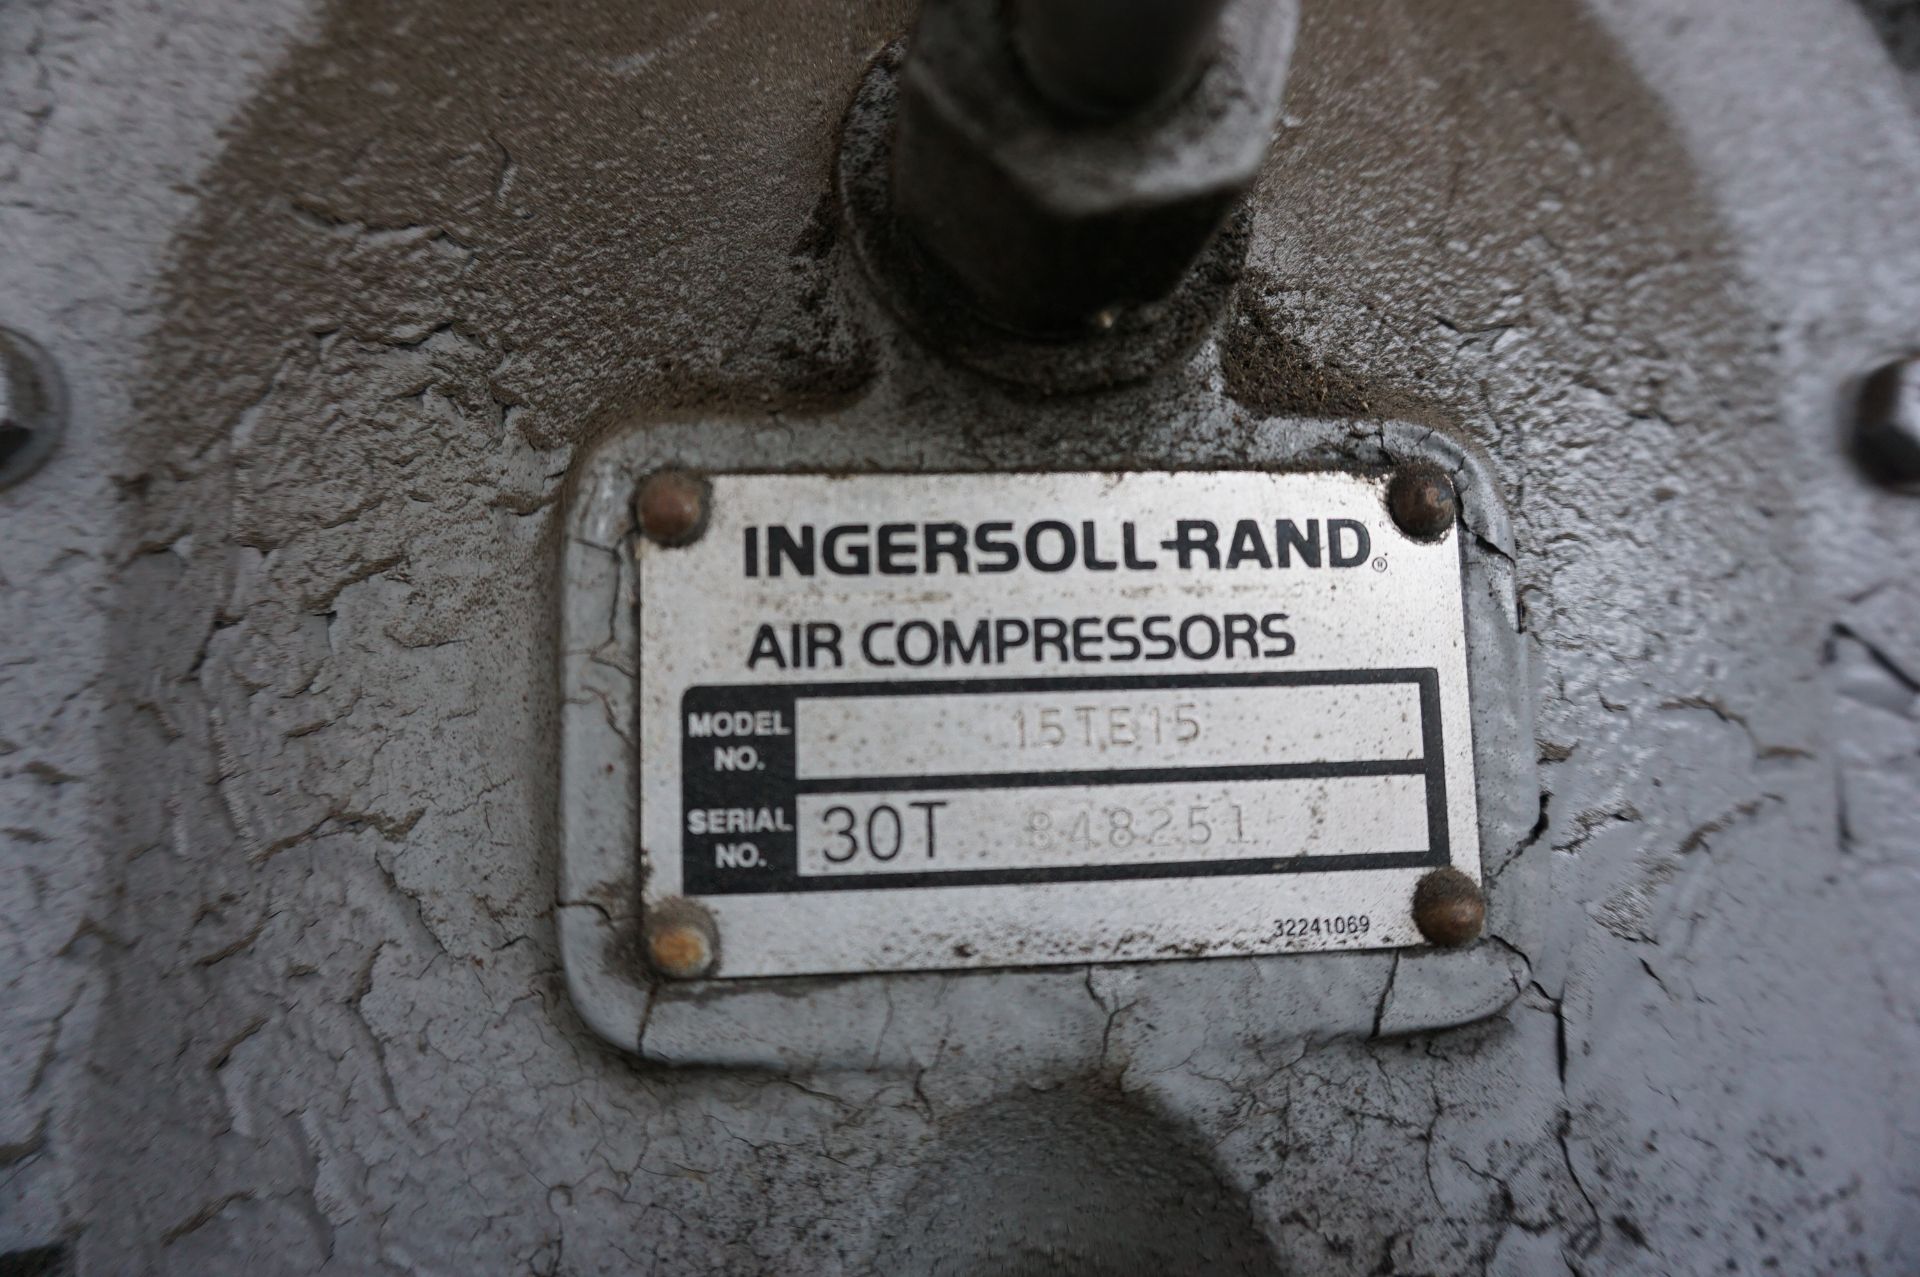 LOT TO INCLUDE: INGERSOLL RAND T30 AIR COMPRESSOR, S/N 848251, ZANDER DRYER, MODEL ASD50, S/N - Image 5 of 5